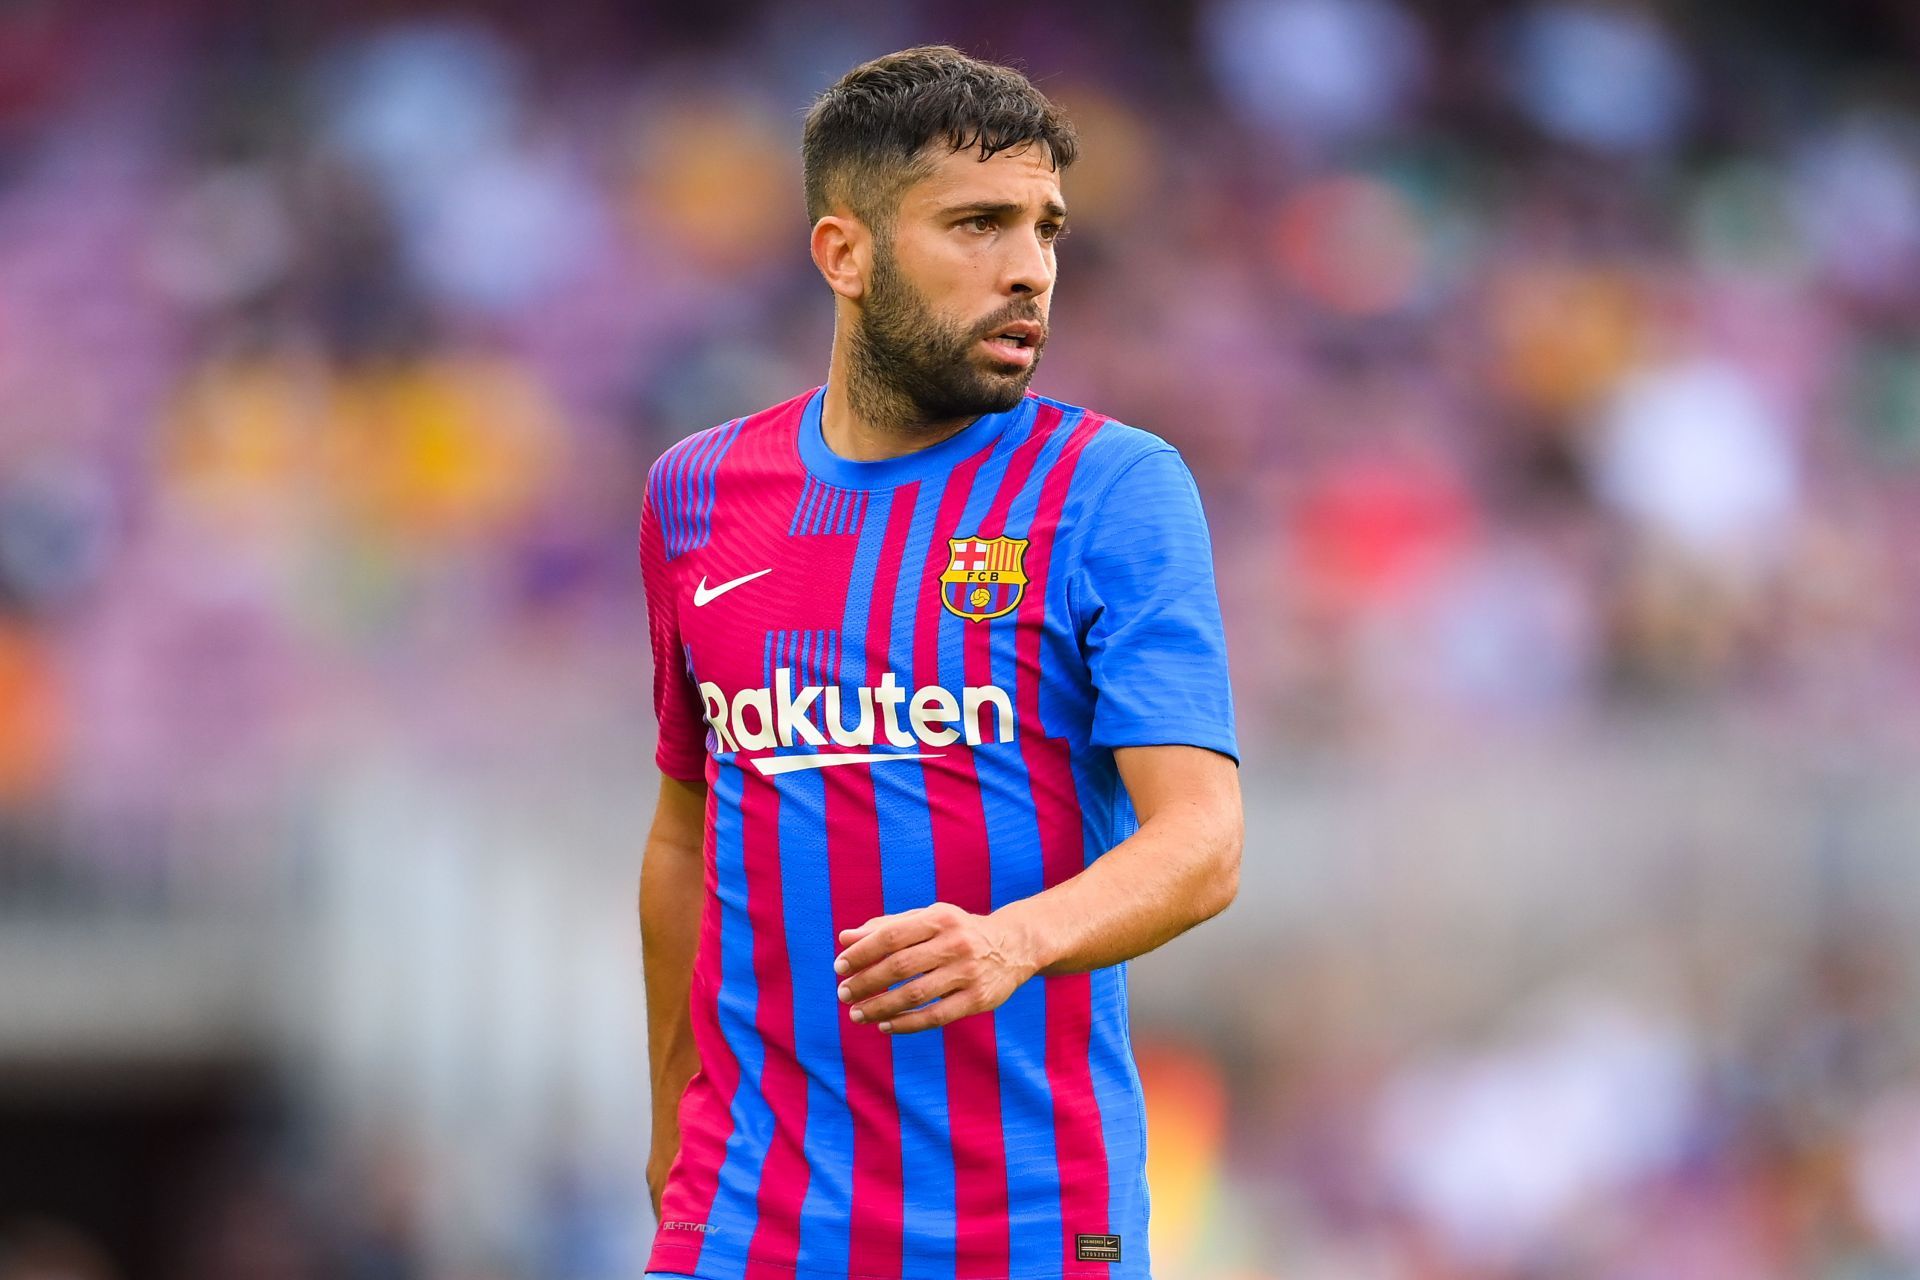 Alba has the highest league assists in the Barcelona squad